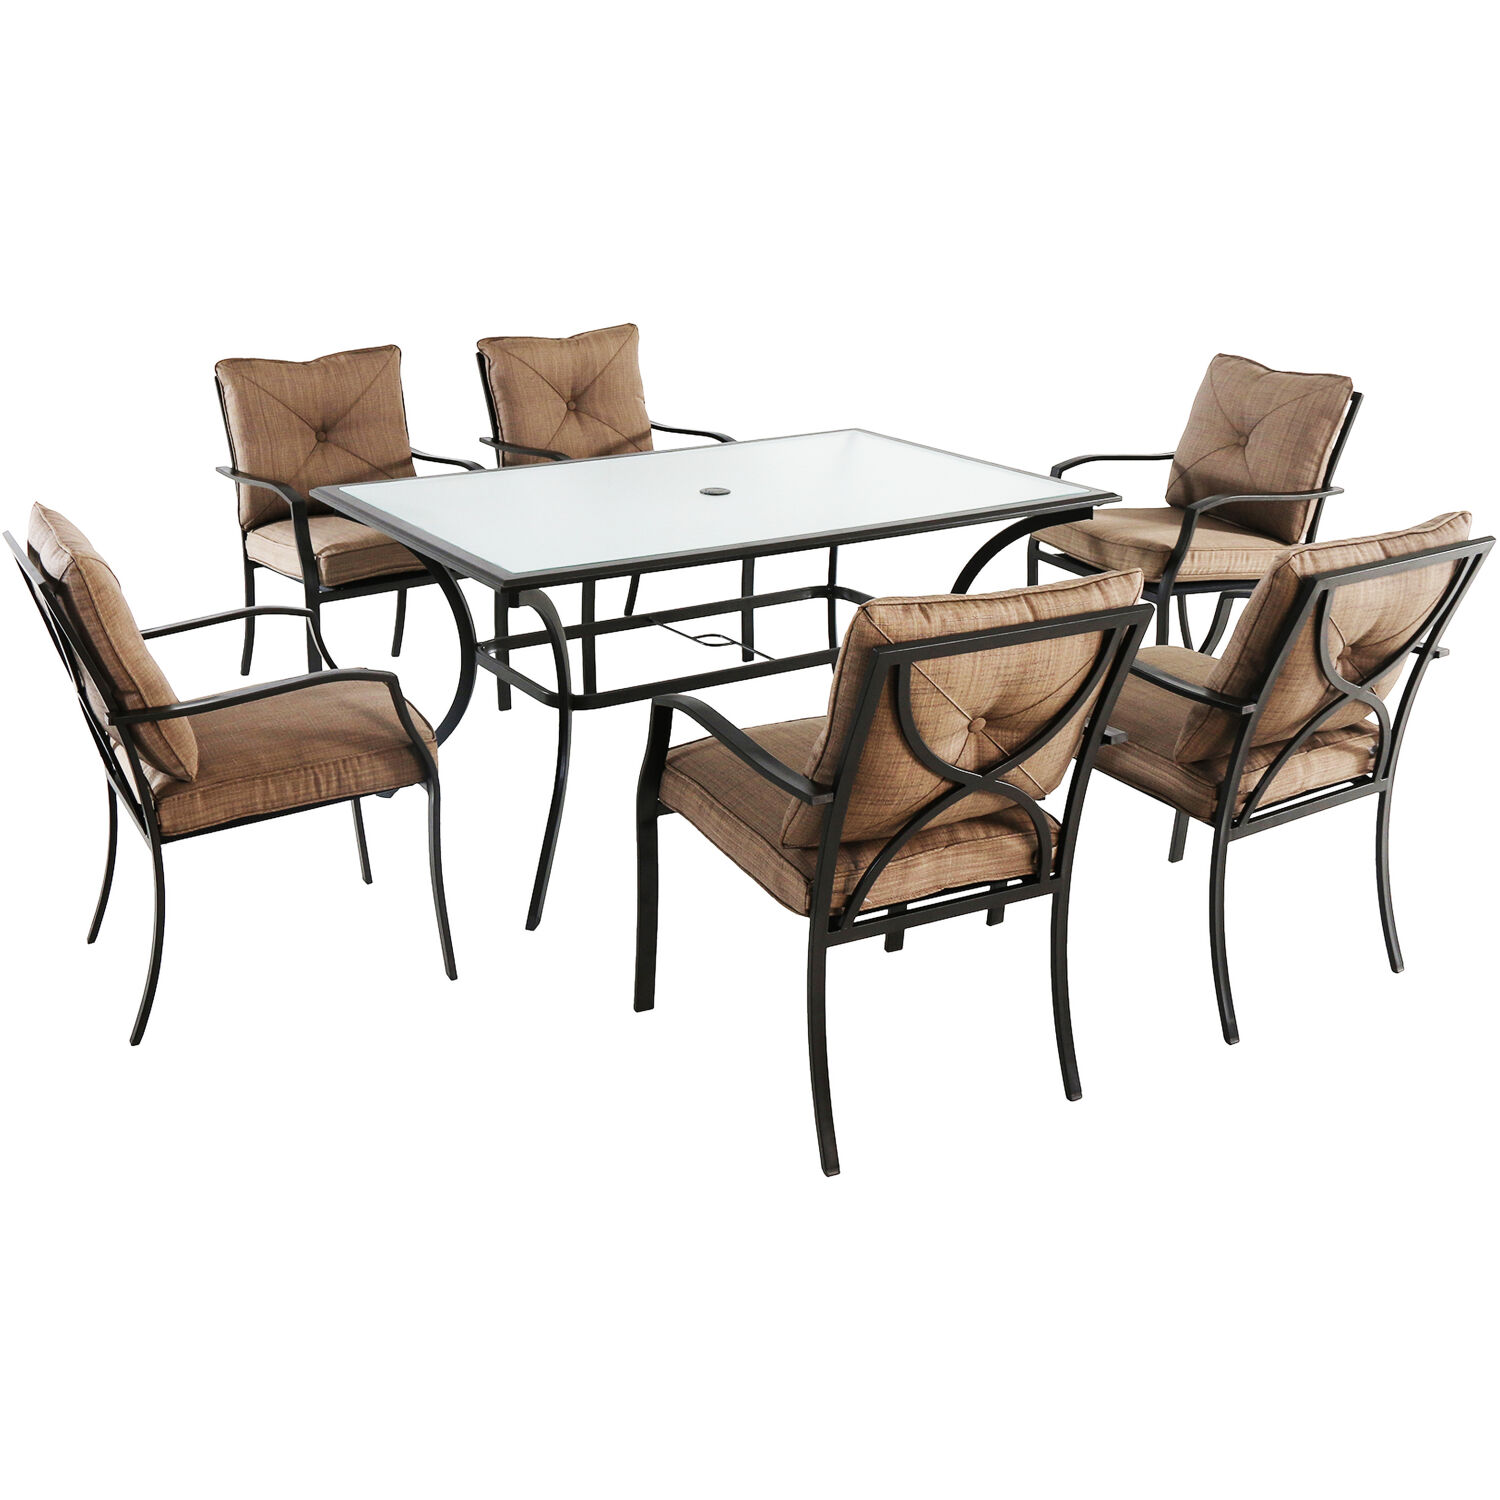 Hanover Palm Bay 7-Piece Steel Outdoor Furniture Patio Dining Set, Seats 6 - image 1 of 23